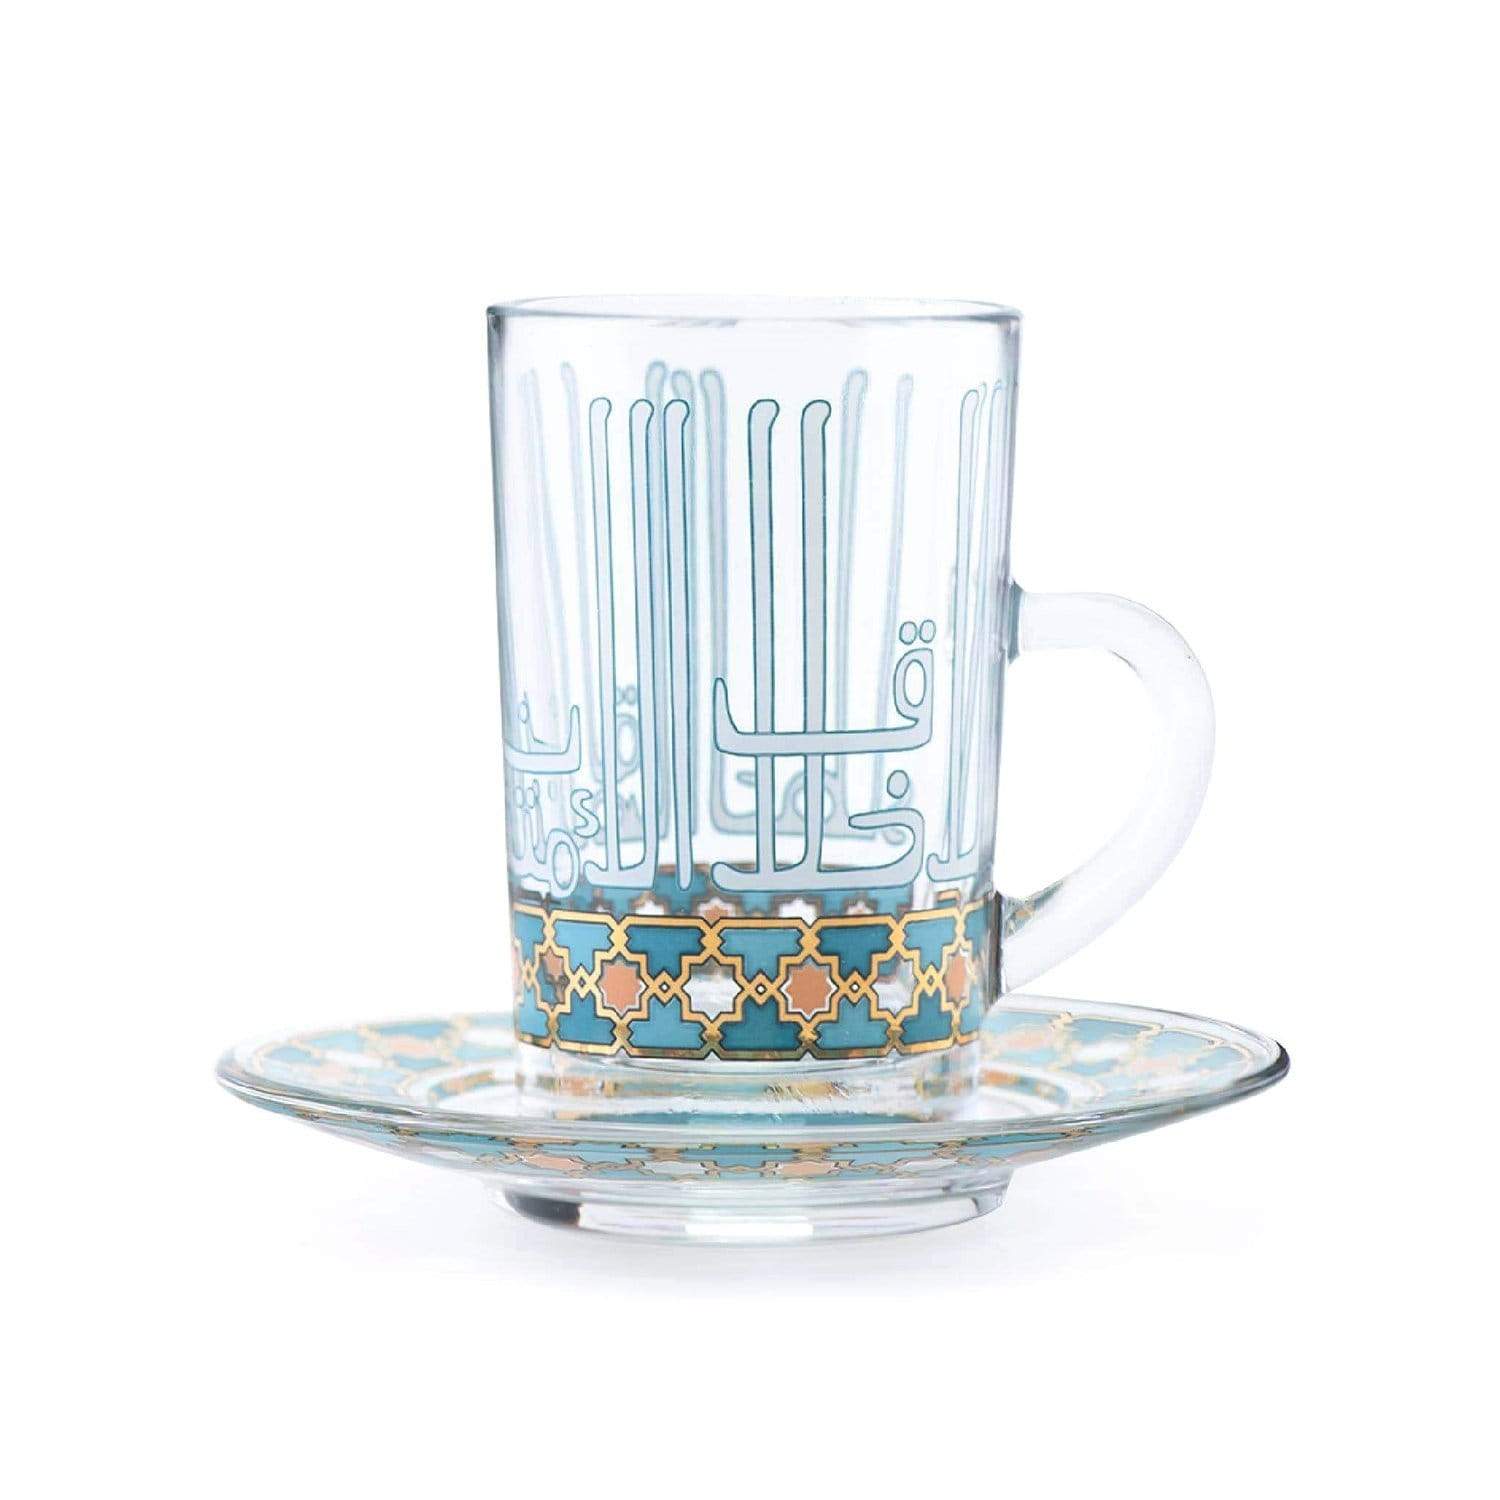 Dimlaj Asala Tea Cup and Saucer Set - Clear, Gold and Green, 12 Pieces - 46694 - Jashanmal Home